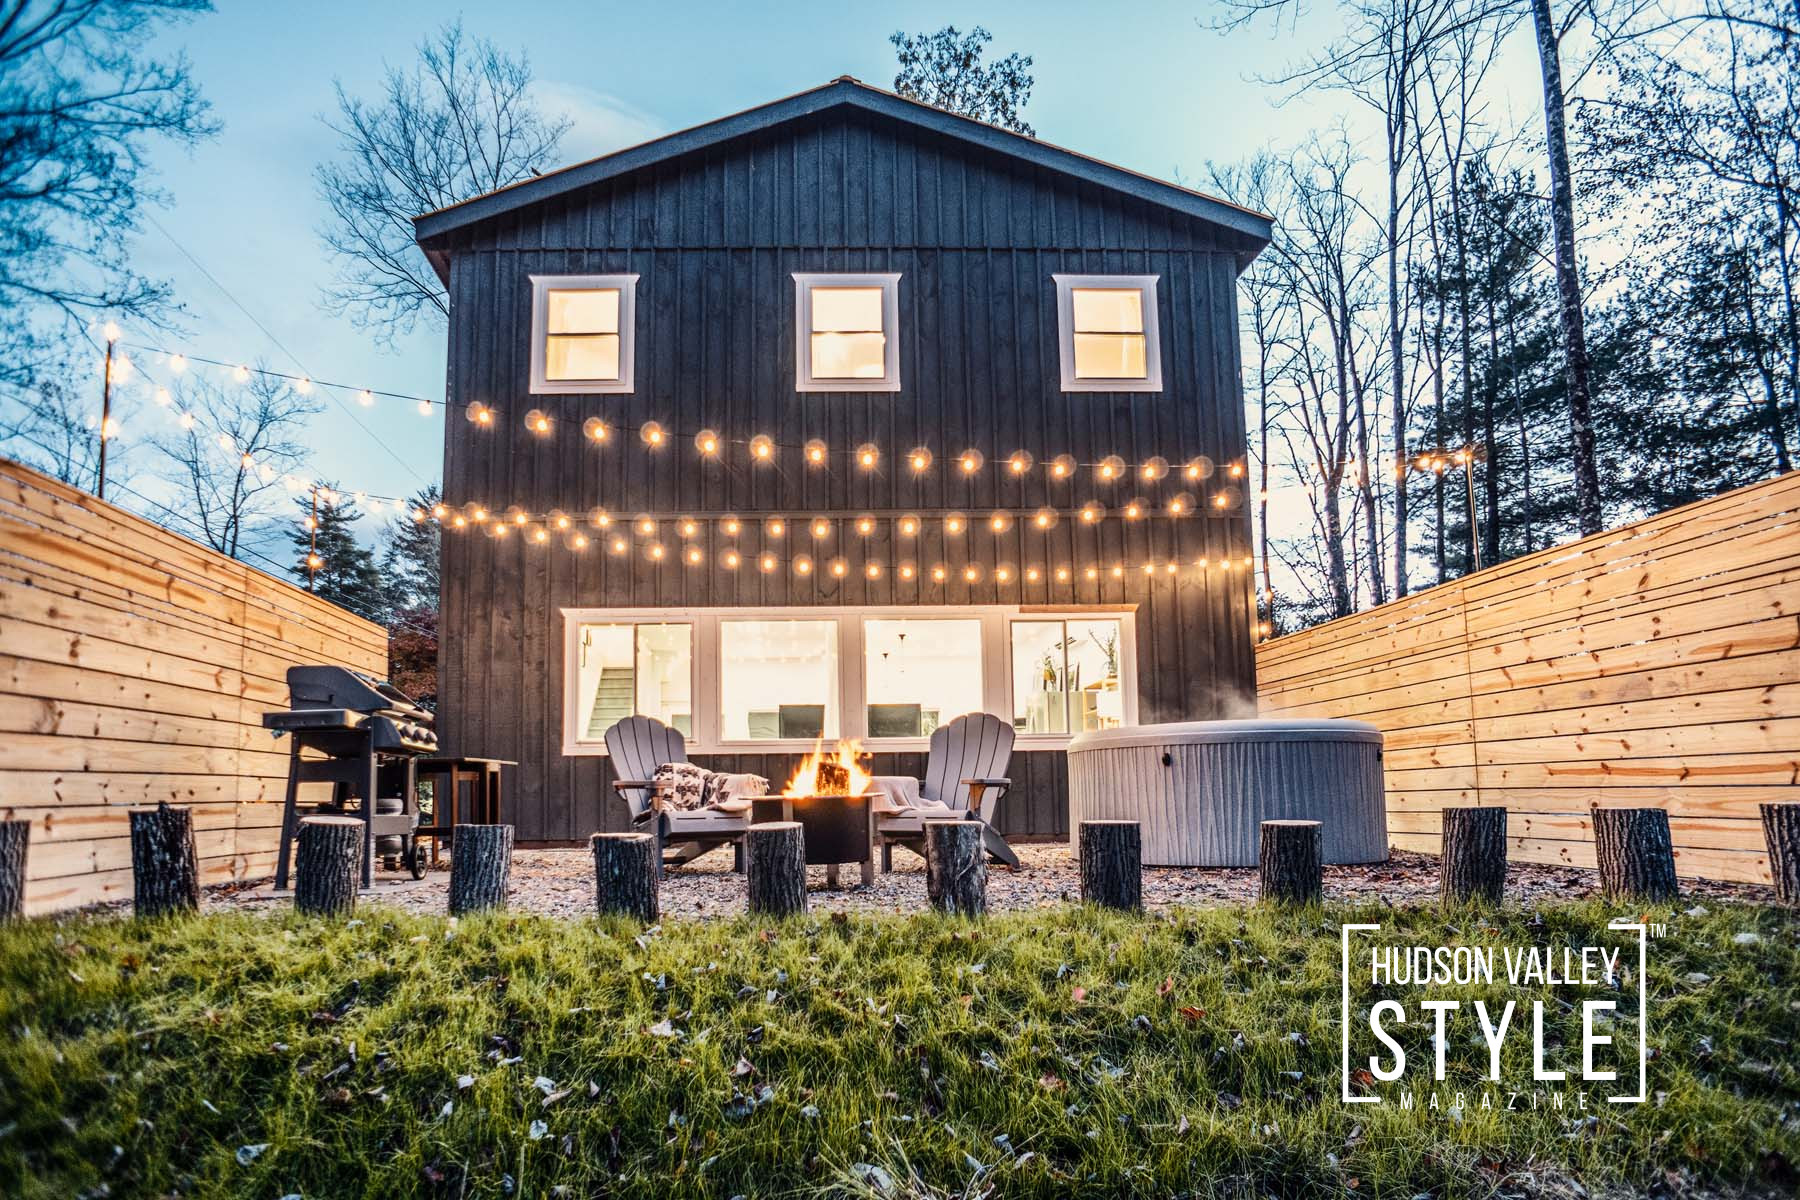 Home Staging Tips for a Farmhouse Style – Hudson Valley Real Estate with Realtor Xiomara Marrero – Photography by Duncan Avenue Studios + Alluvion Media